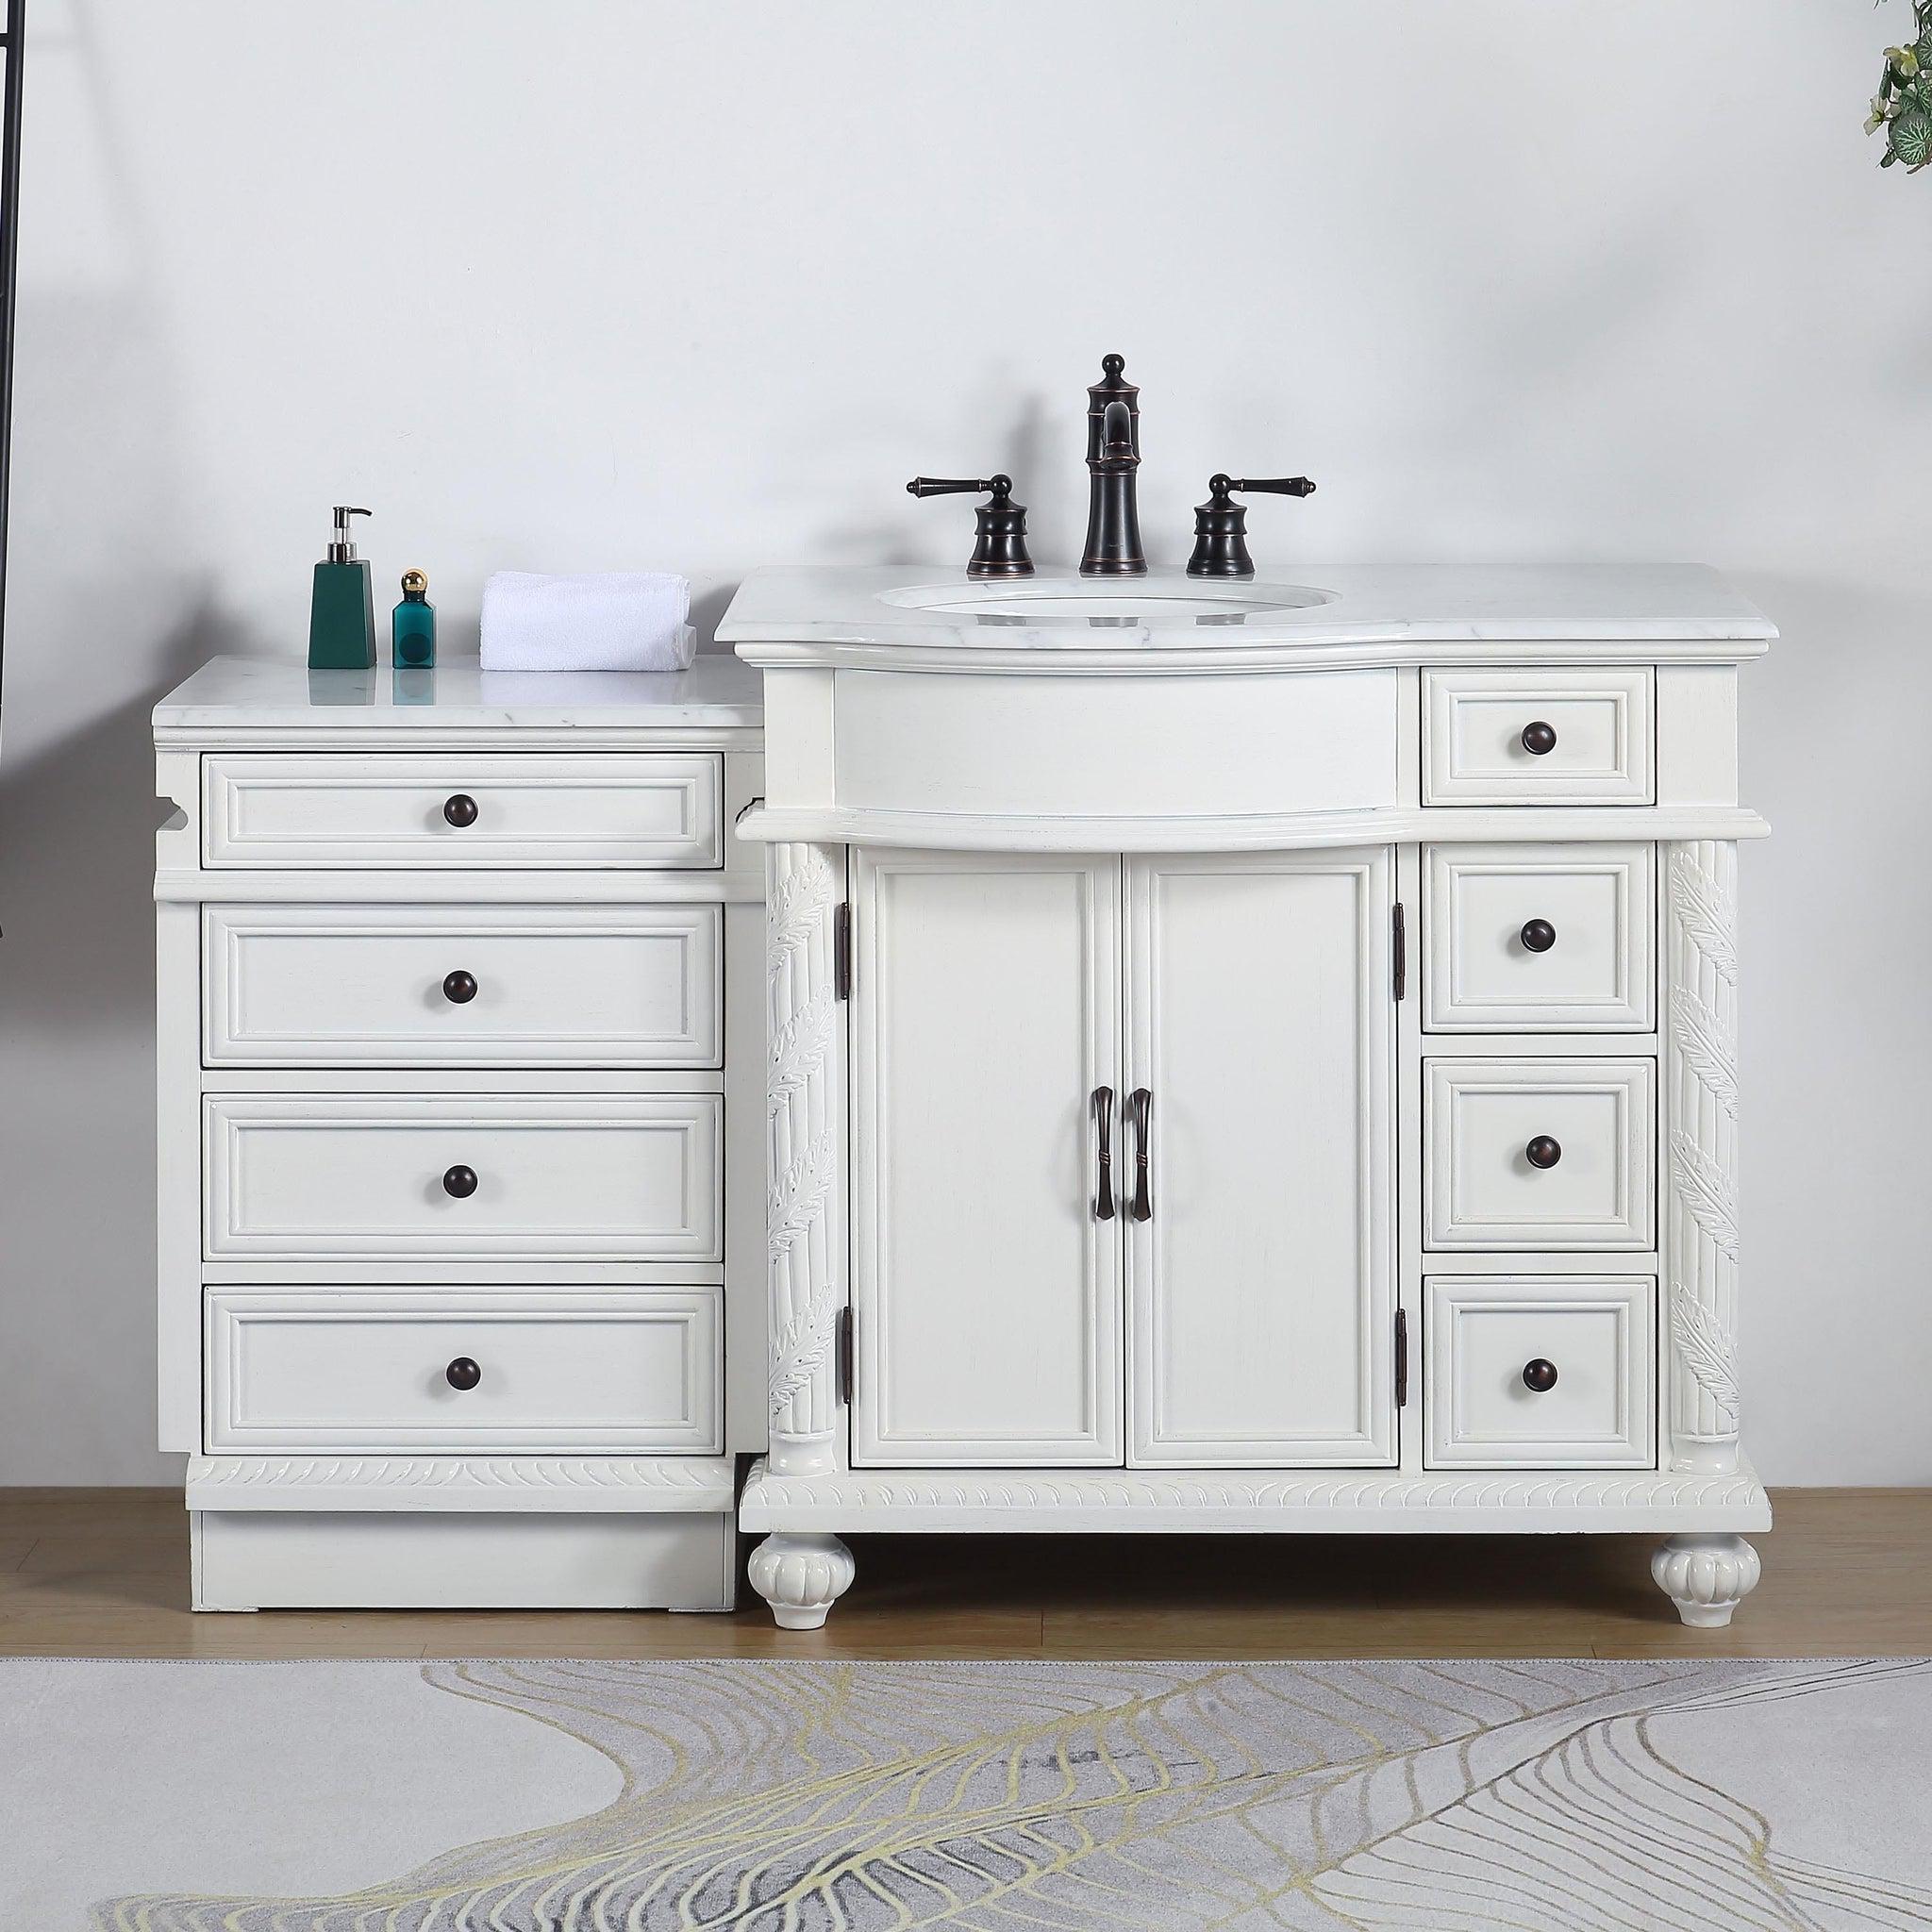 36 inch Single Solid Wood Bathroom Vanity Set, with Drawers, Carrara White Marble Top, 3 Faucet Hole, White, Size: Large